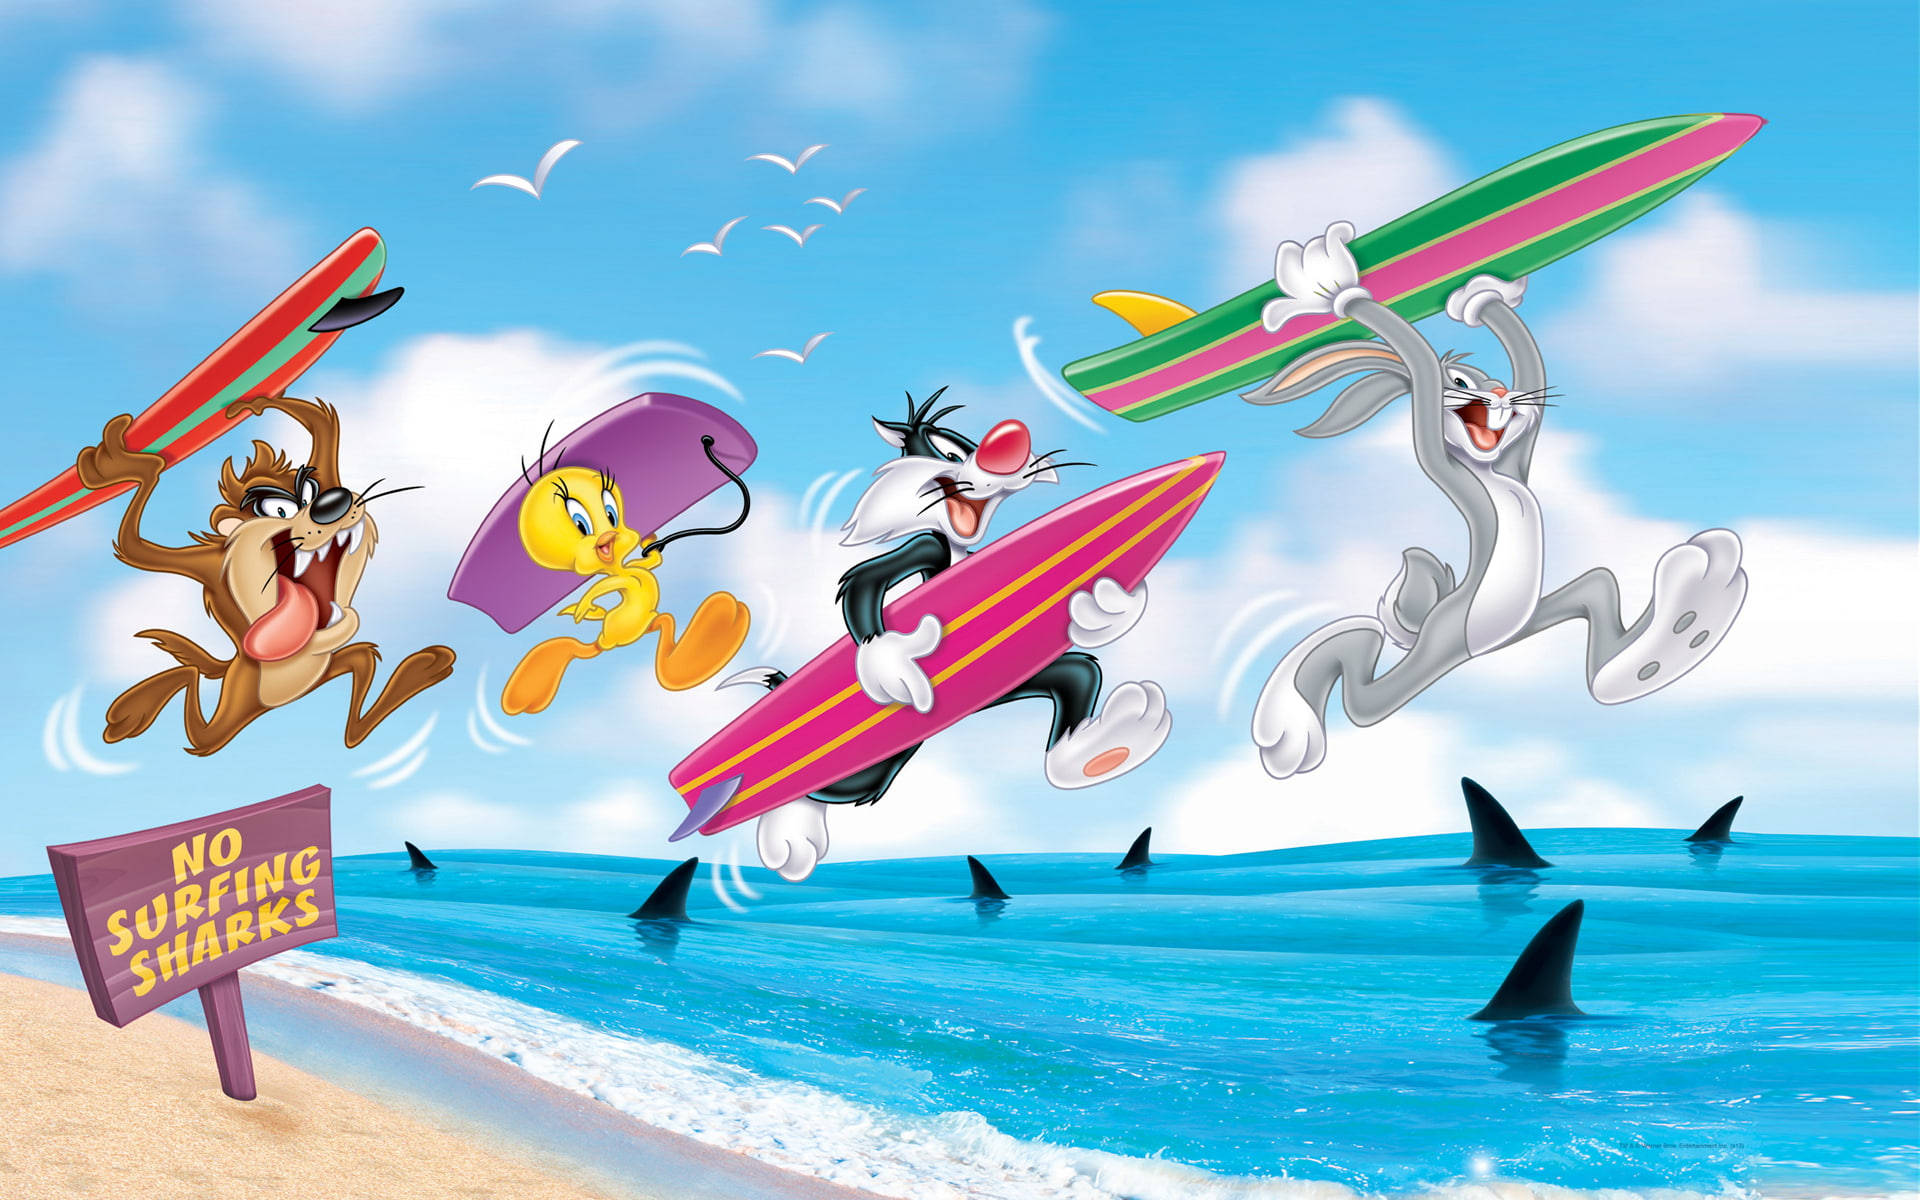 Looney Tunes Surfing With Sharks